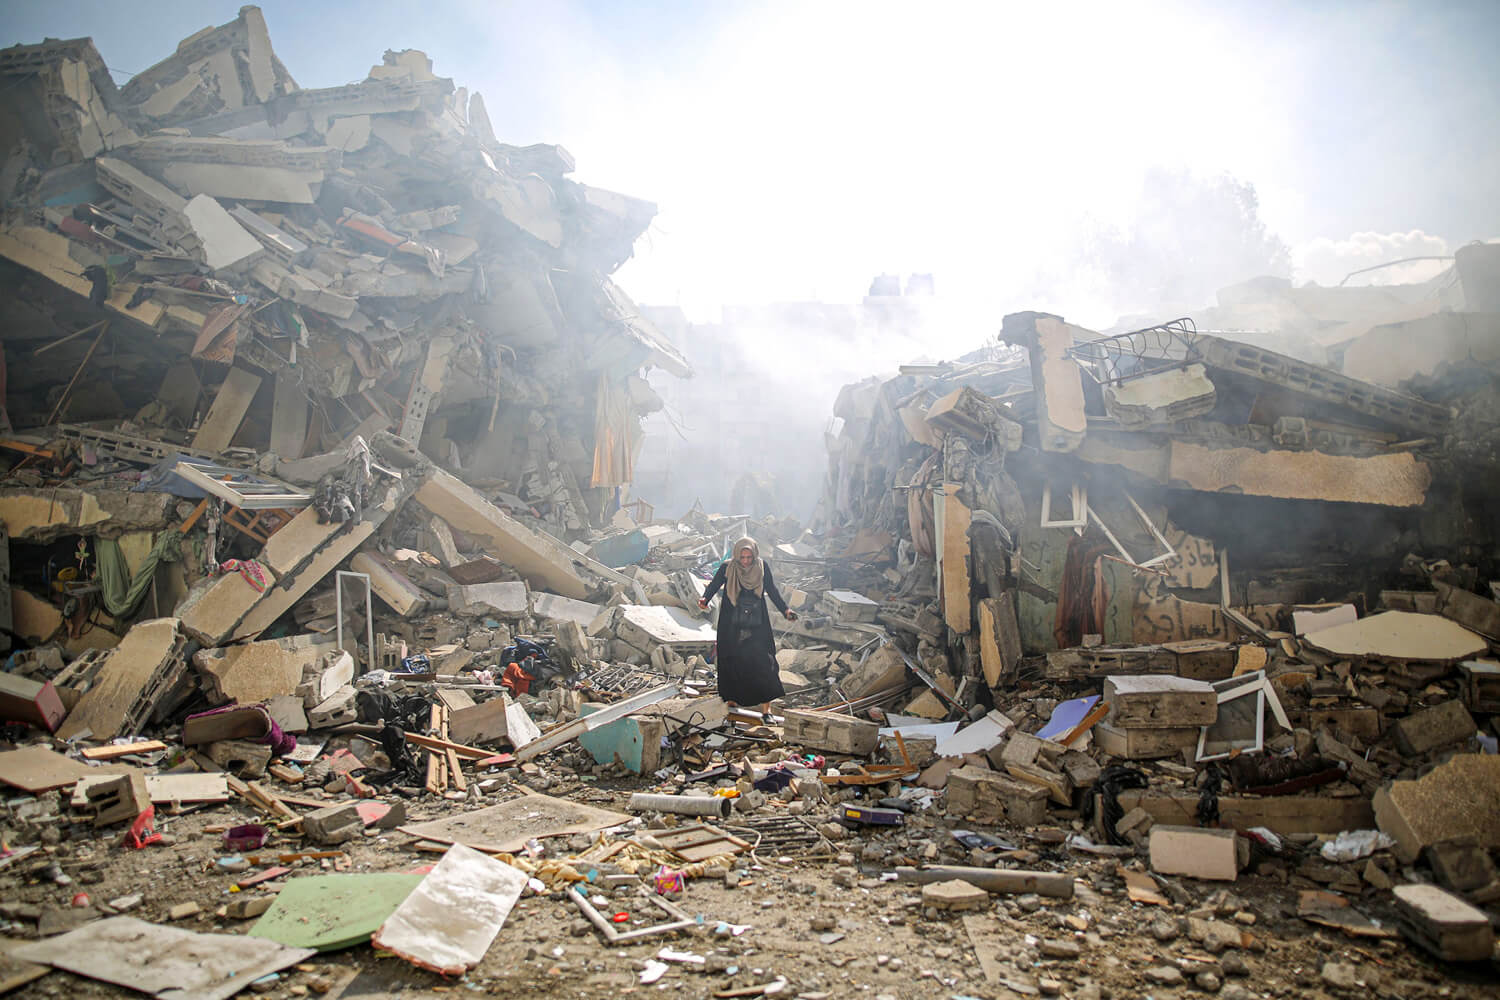 A woman stands among rubble in what was once a street surrounded by buildings.